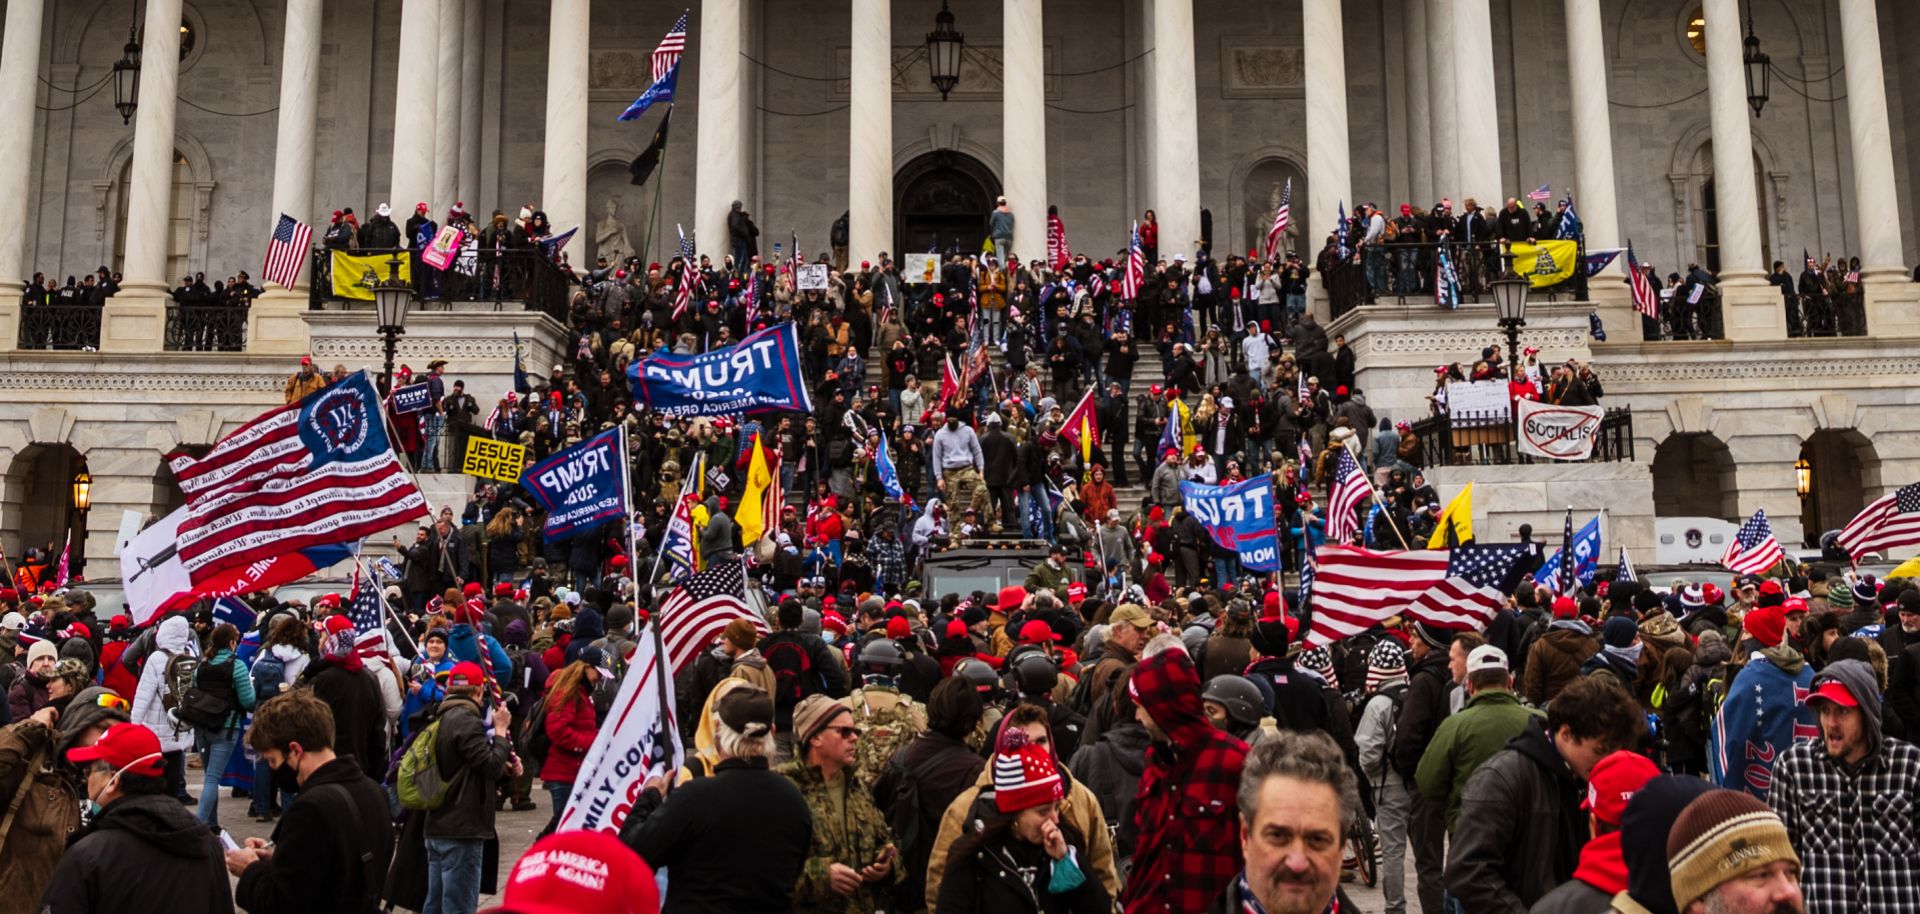 A large group of pro-Trump protesters stands on the steps of the U.S. Capitol after storming the building’s grounds on Jan. 6, 2021, in Washington D.C. 